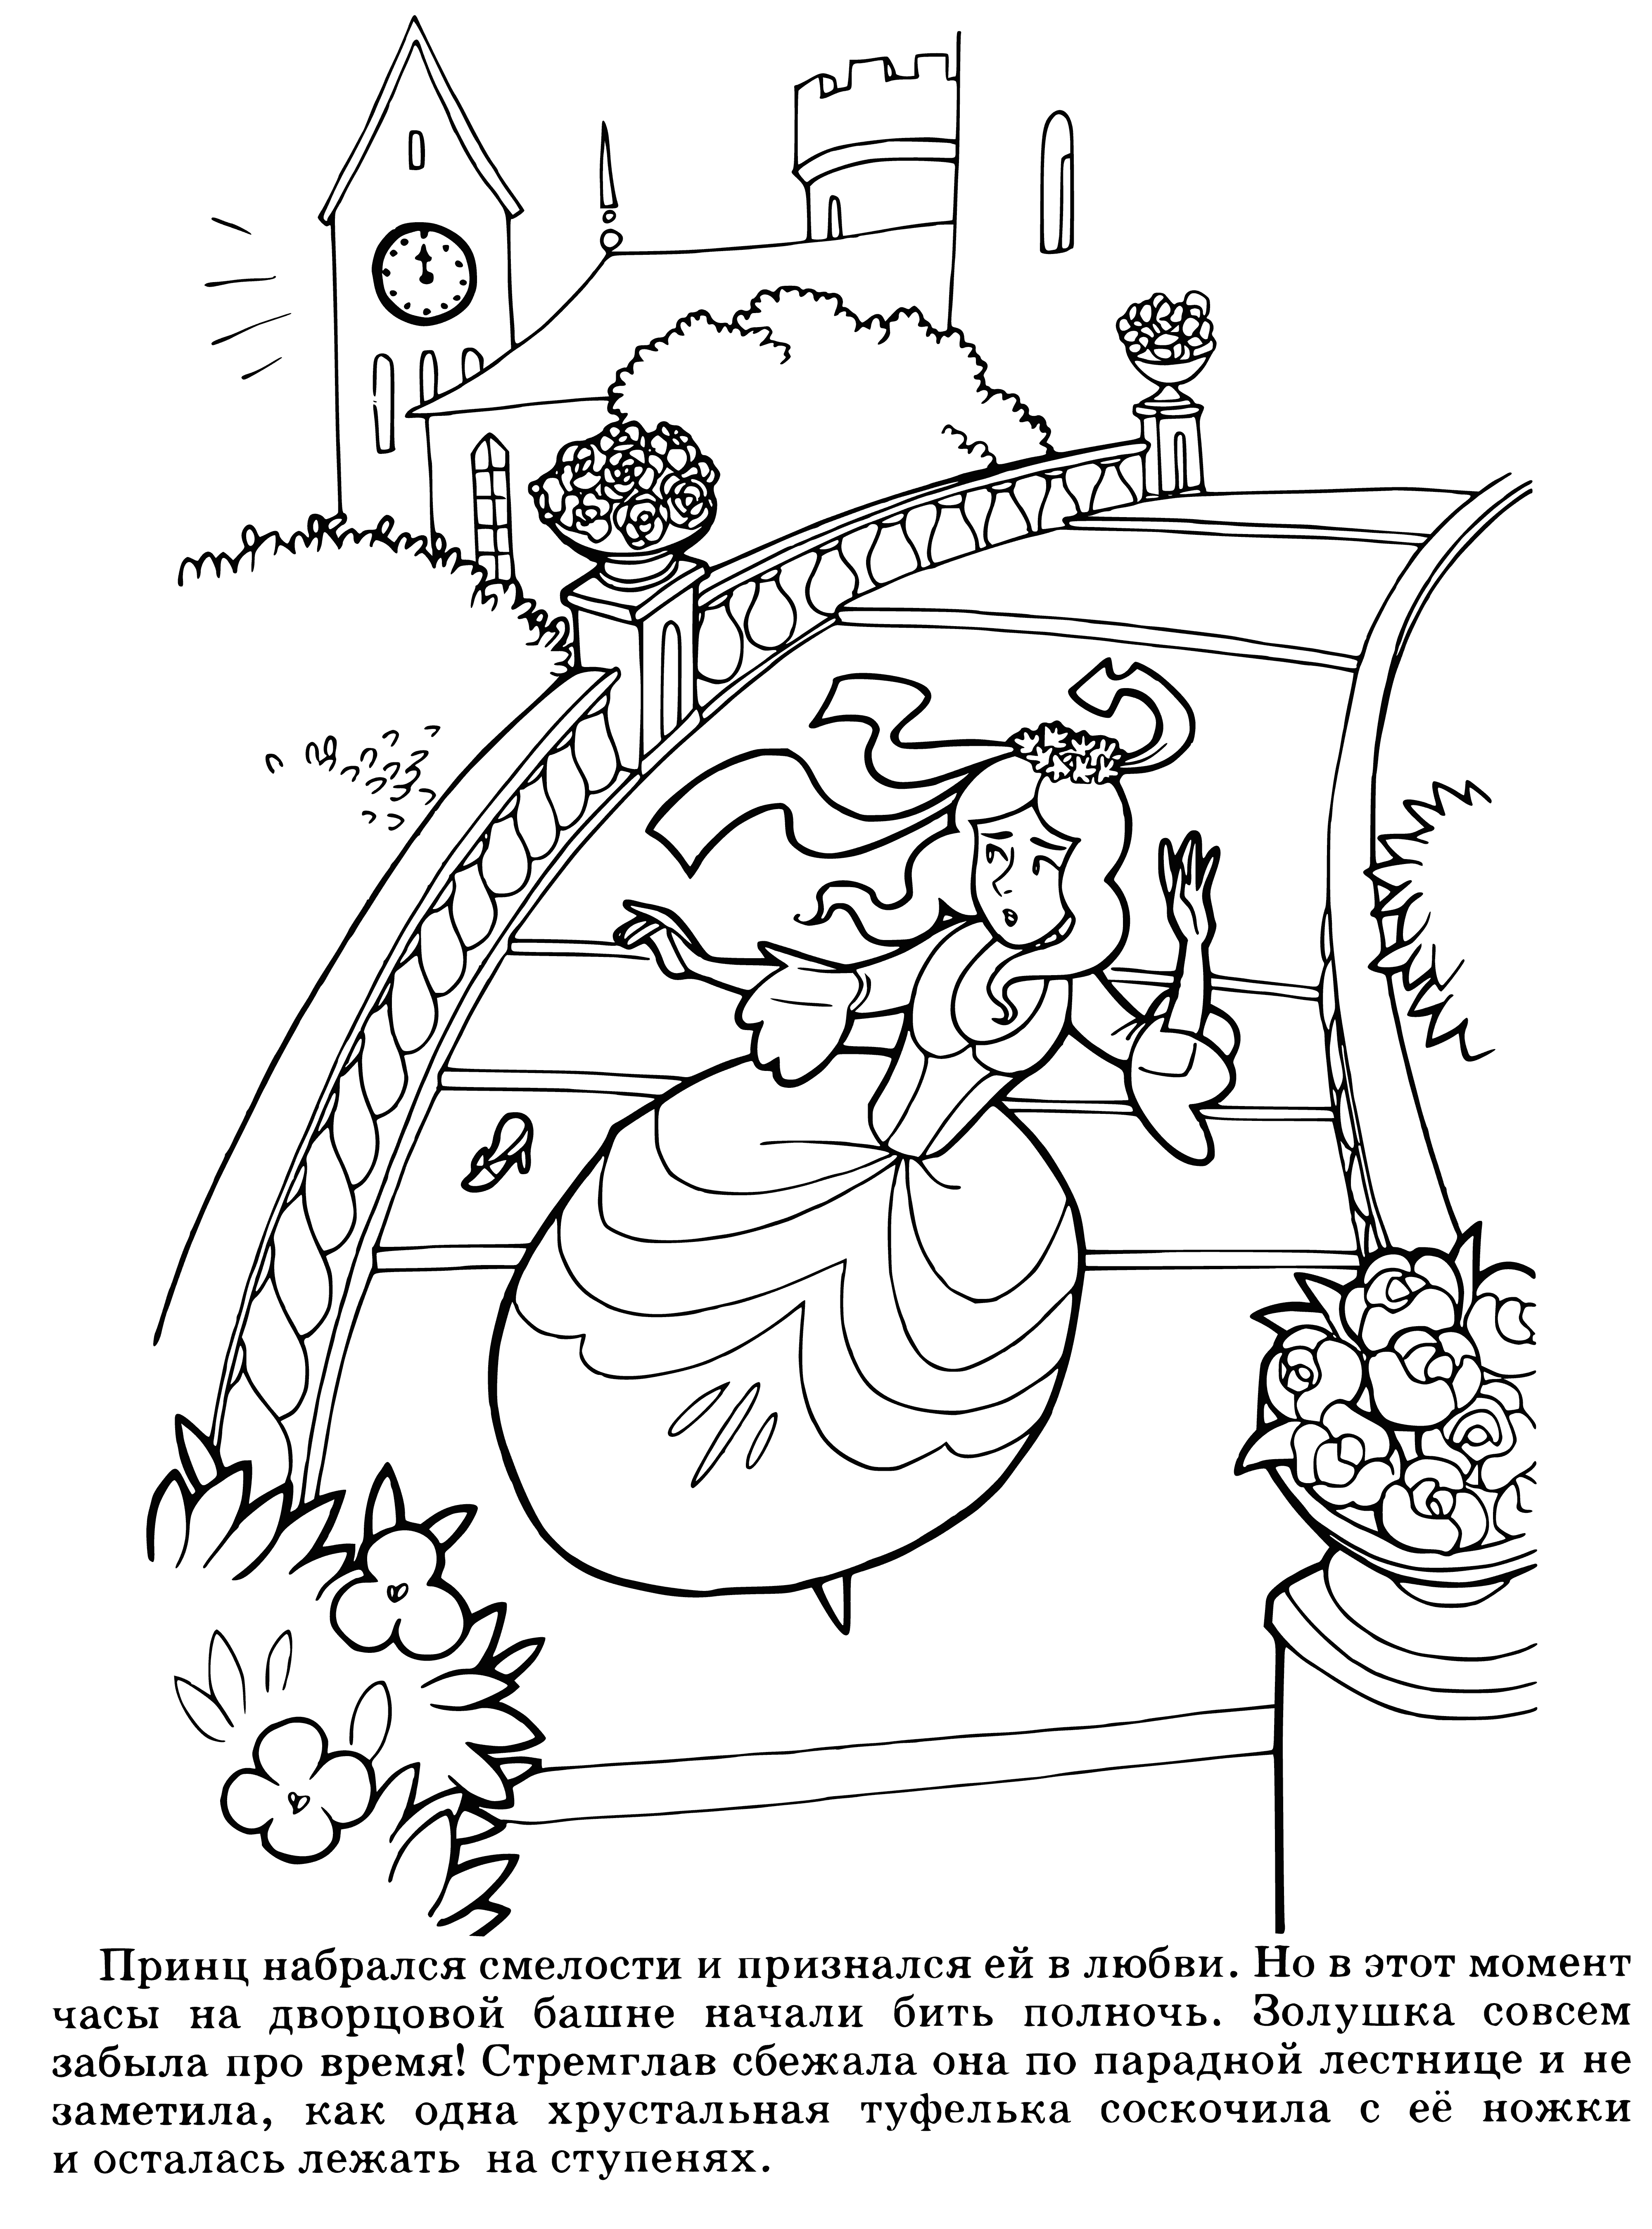 Crystal slipper coloring page